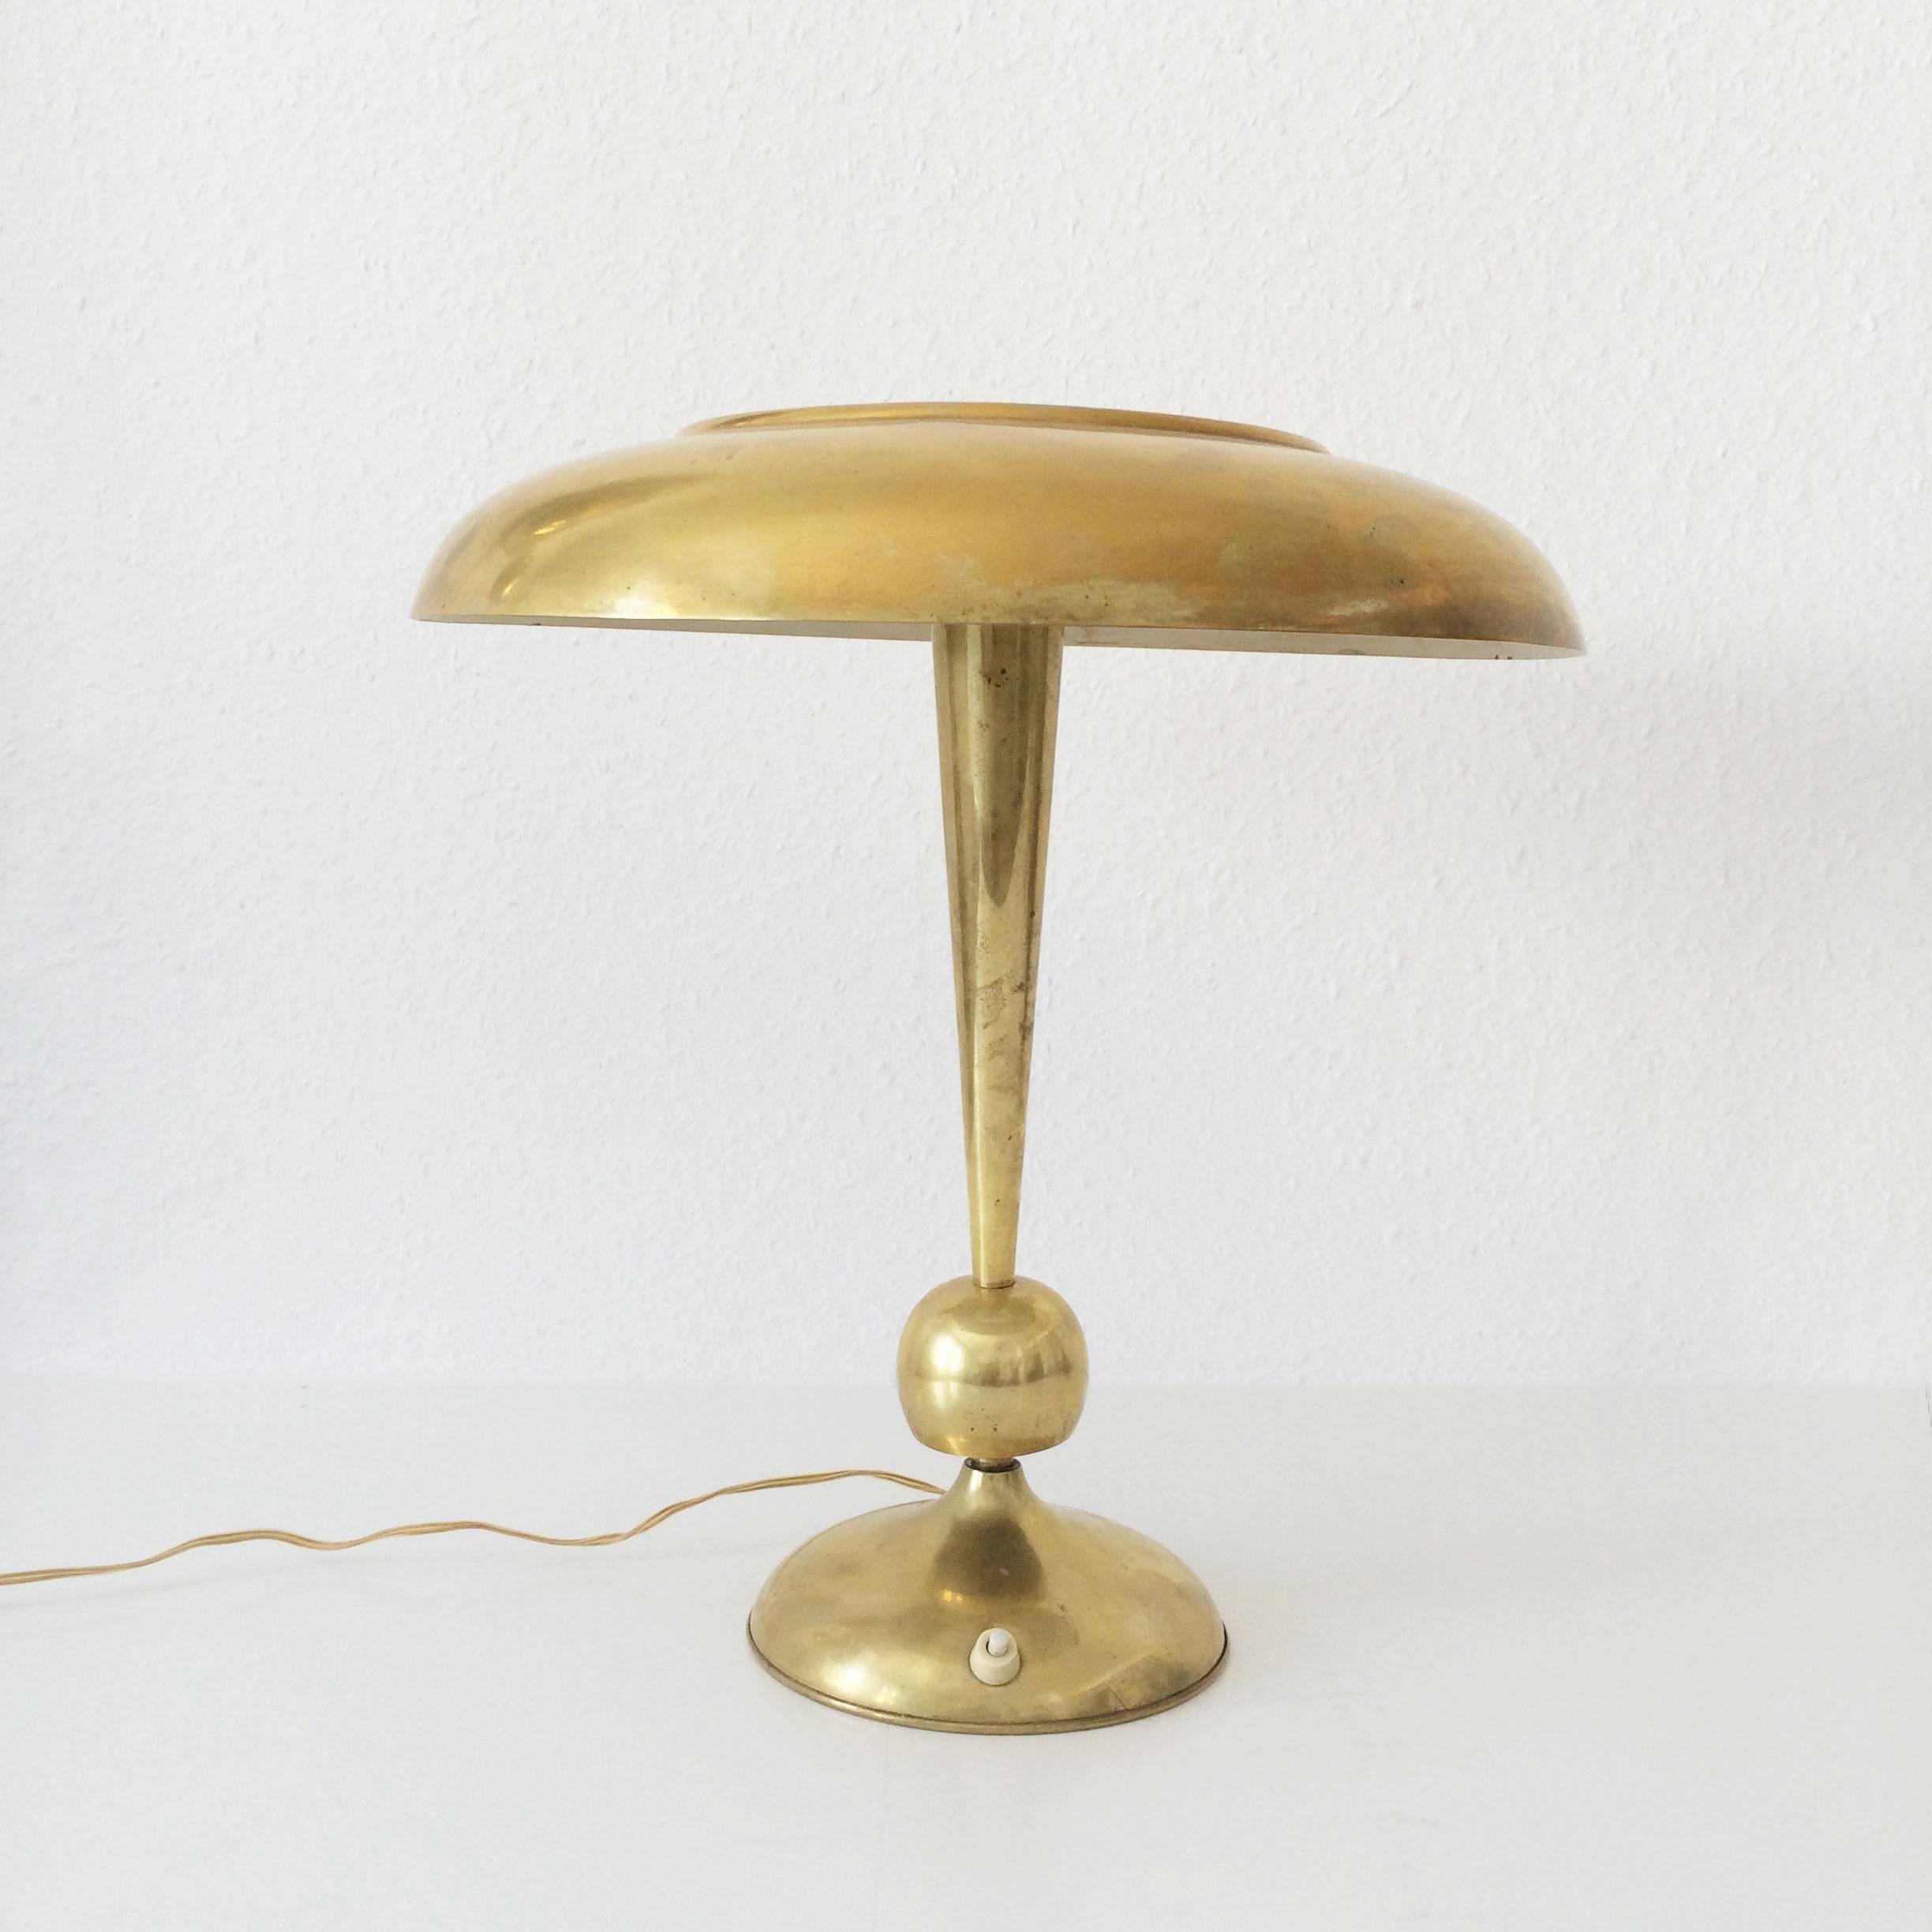 Table lamp by Oscar Torlasco. Manufactured by Lumi, Italy in 1950s. Adjustable arm. The lamp is executed with three E14 screw fit bulbs.